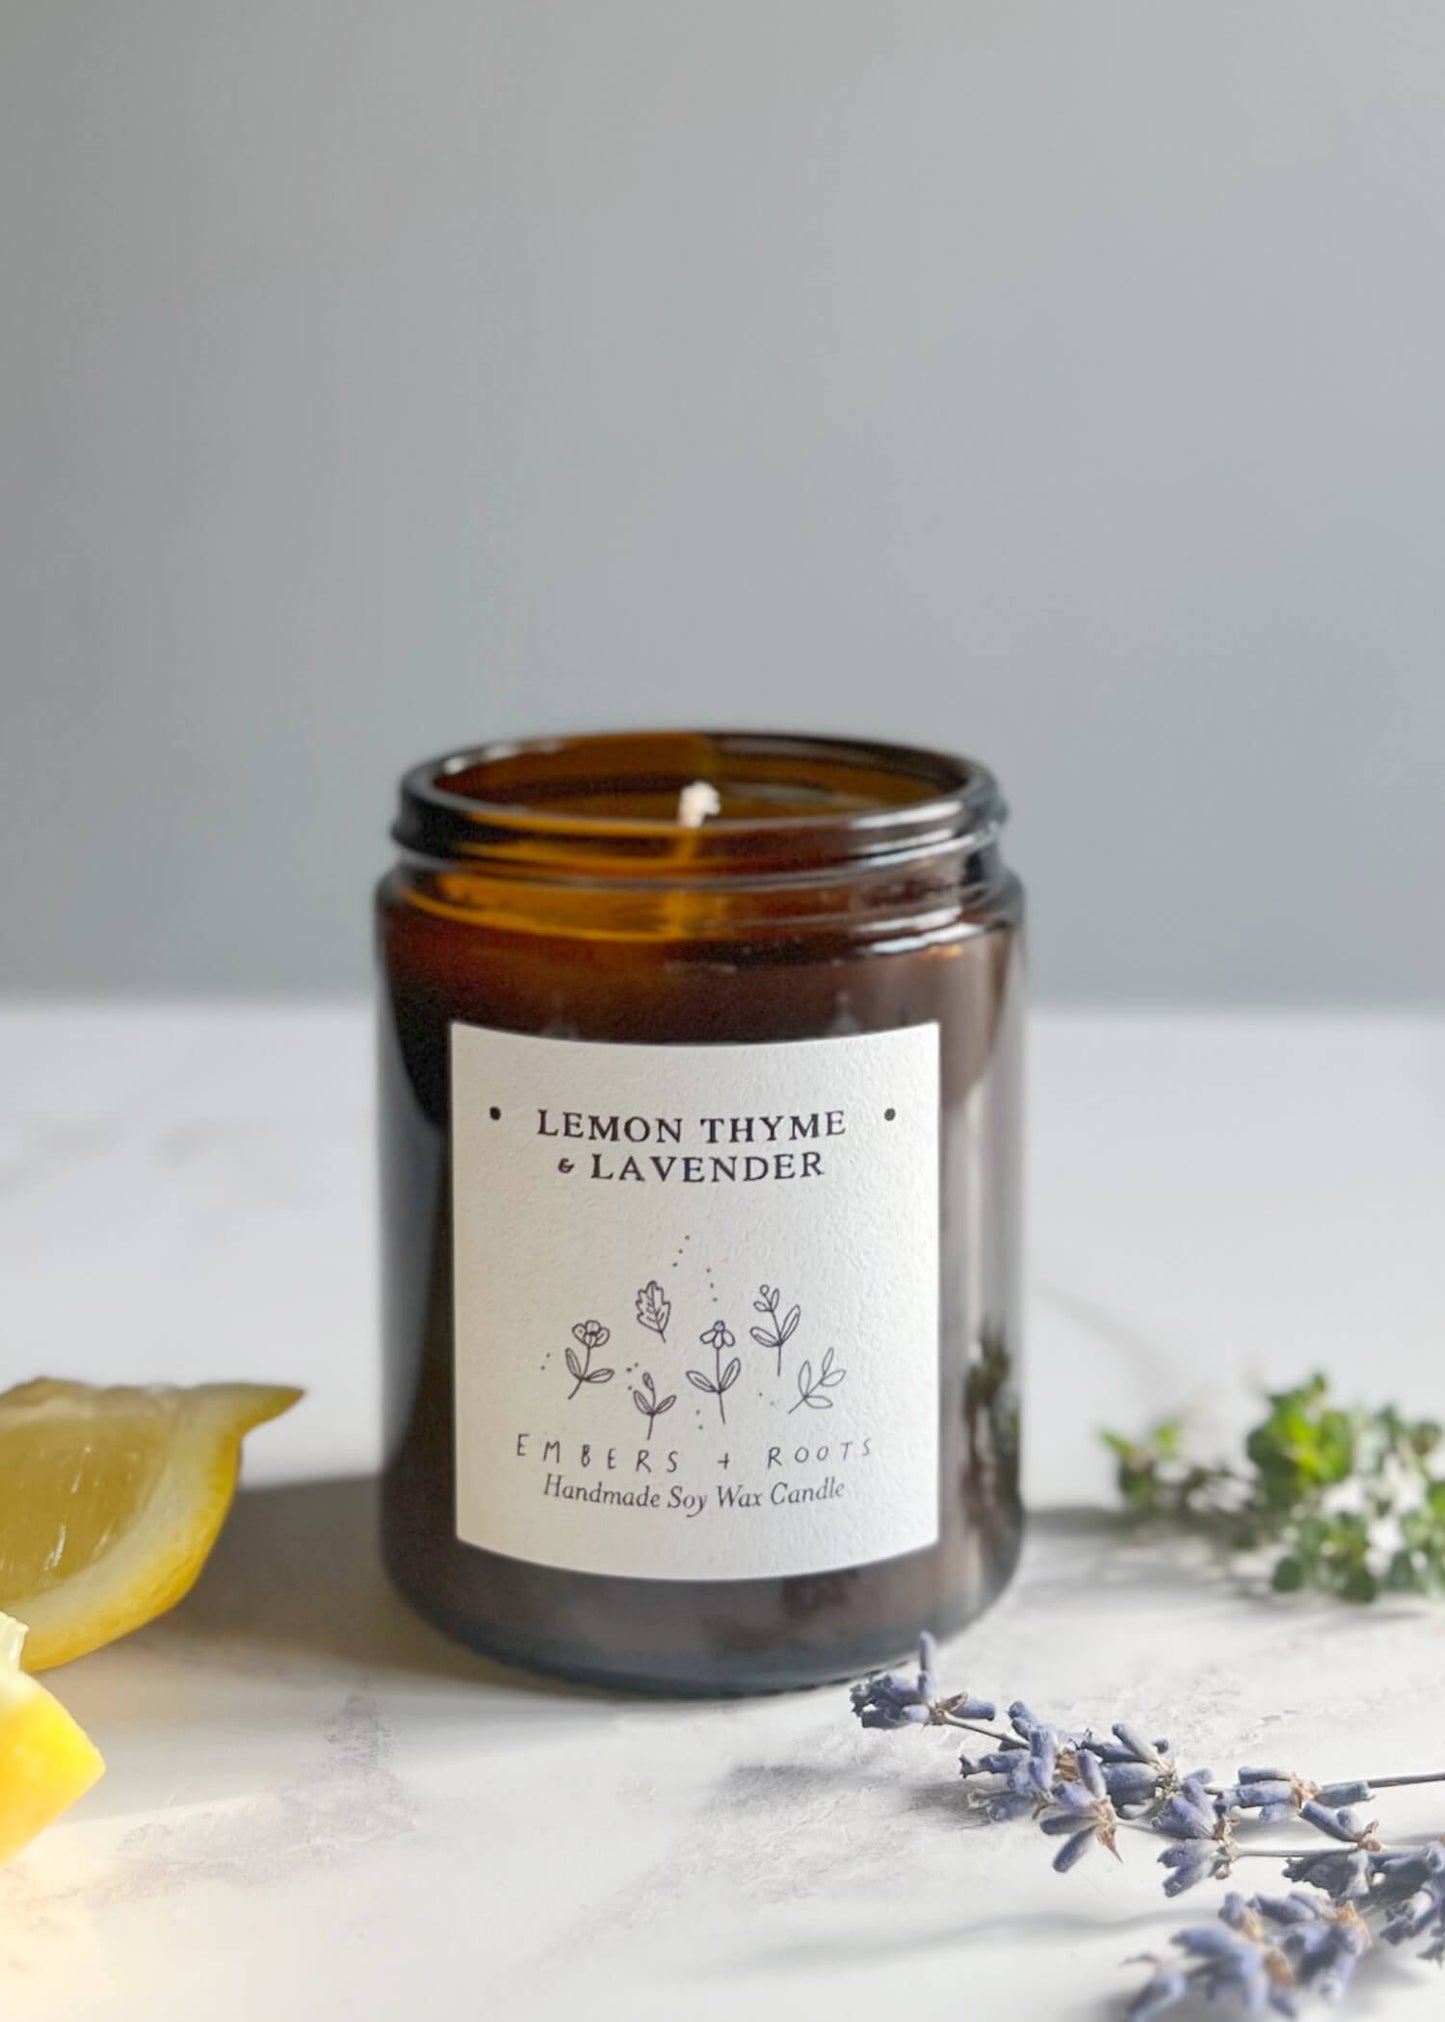 Soy candle with lemon thyme and lavender scent